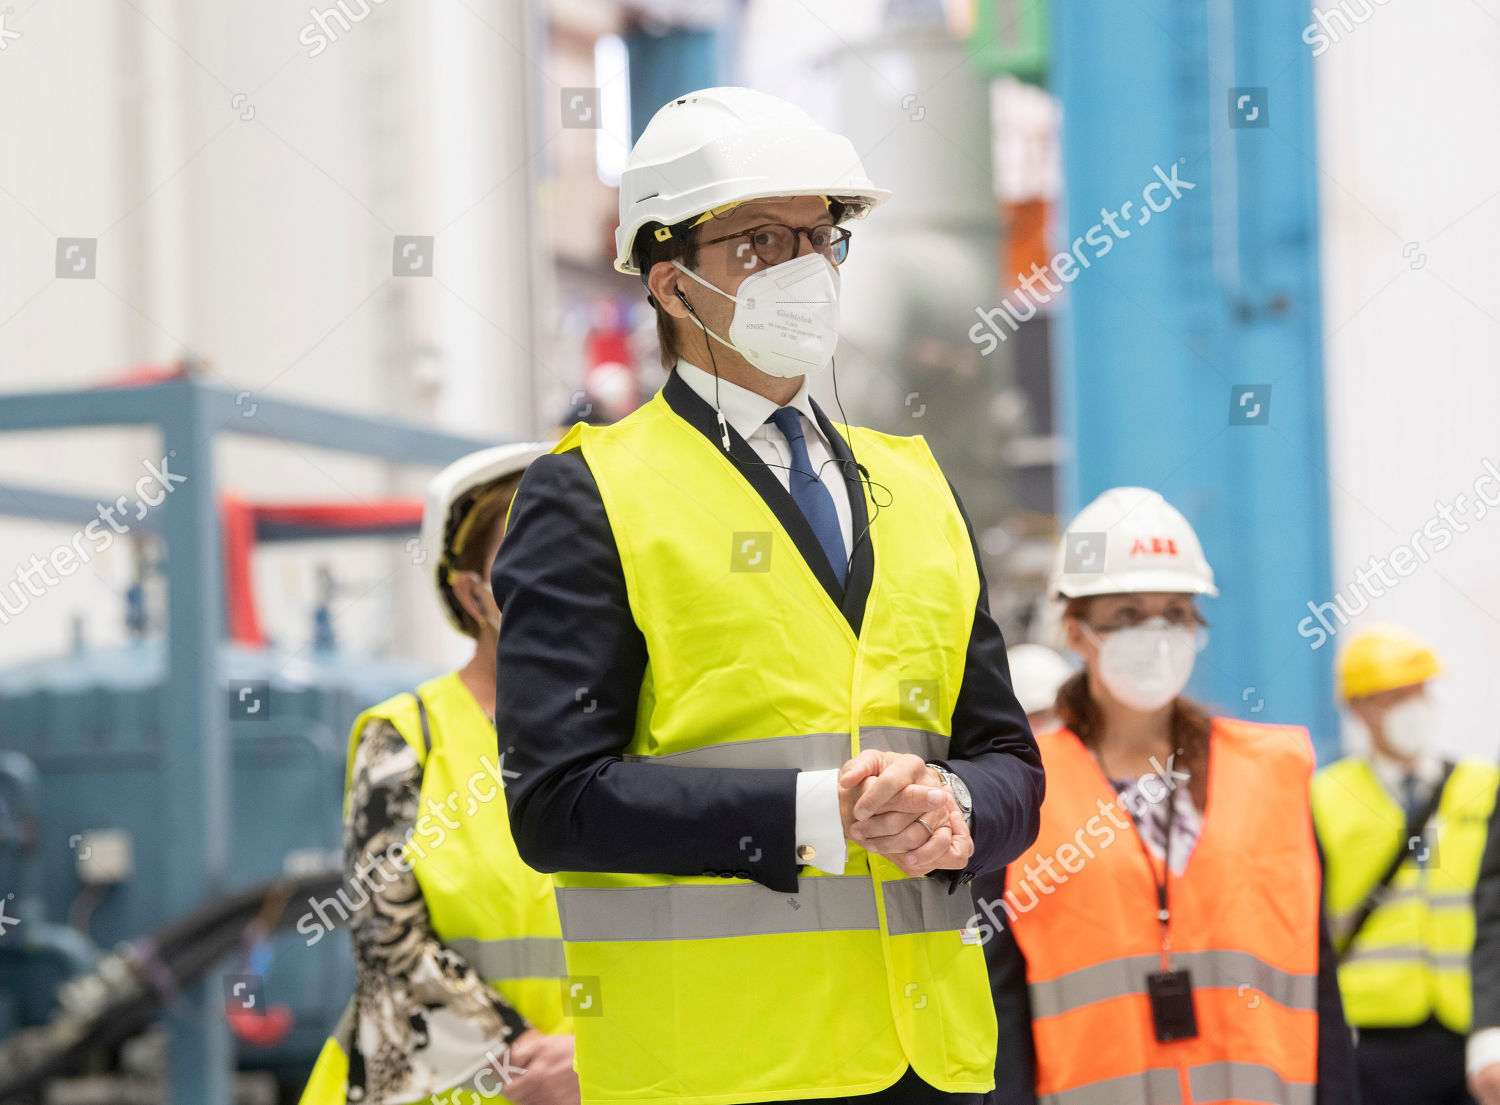 prince-daniel-visits-the-production-line-at-hitachi-abb-powergrids-ludvika-sweden-shutterstock-editorial-10784178i.jpg